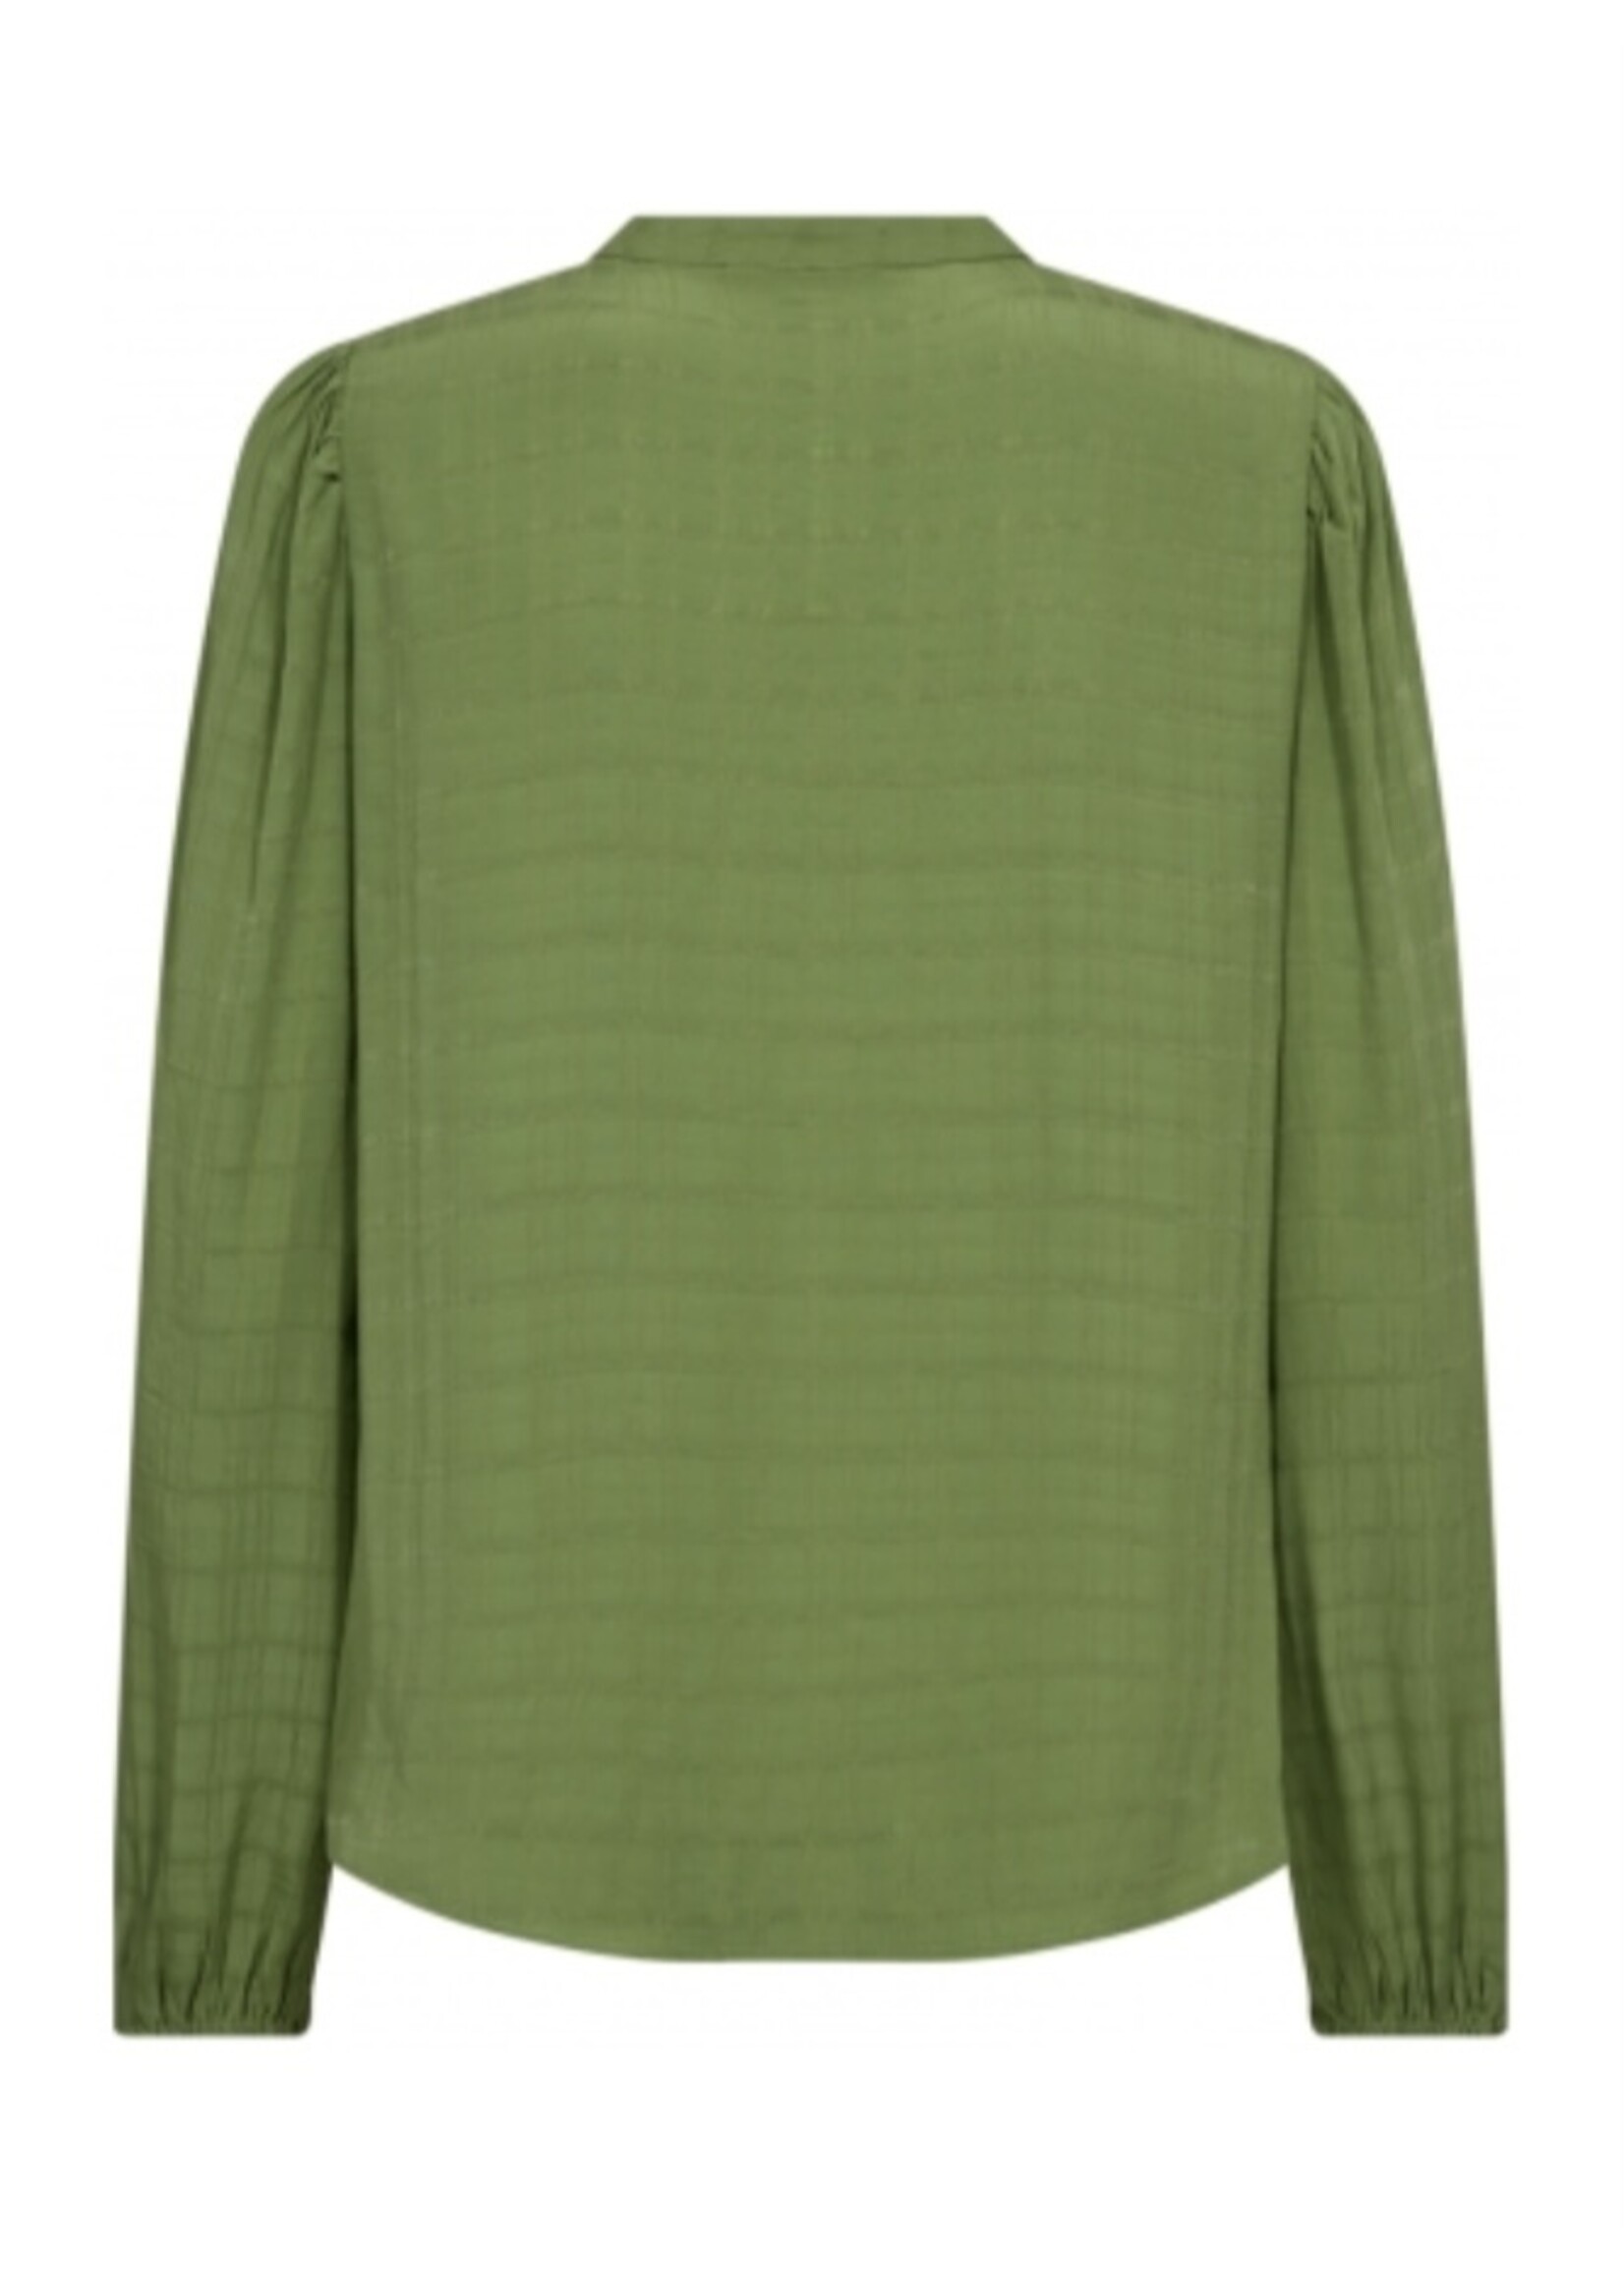 Freequent Freequent - Need - Blouse - Pale mauve, Piquant green, Rococco red